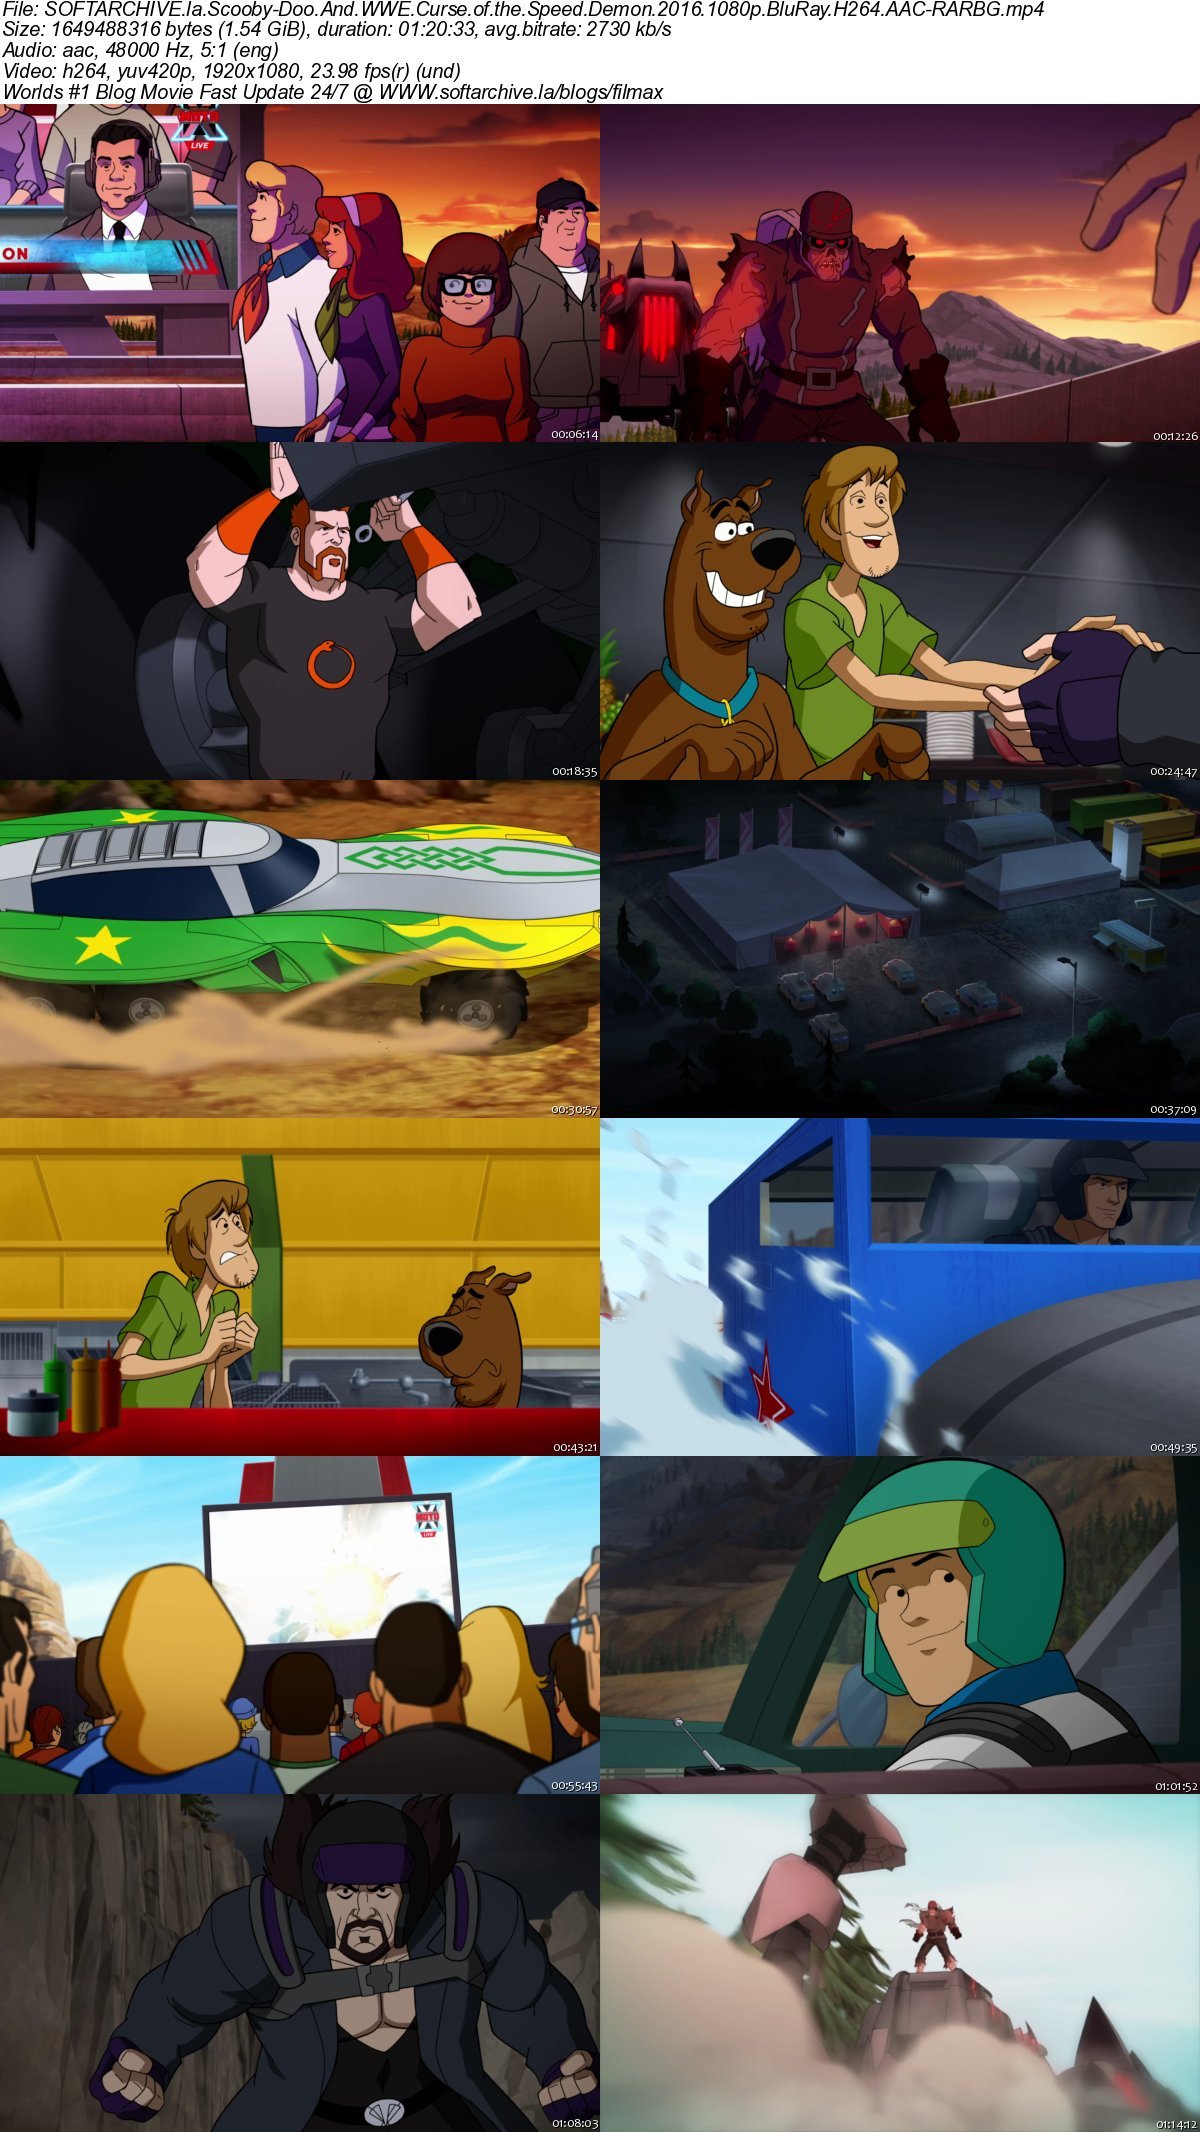 Scooby Doo And WWE Curse of the Speed Demon 2016 1080p BluRay H264 AAC ...